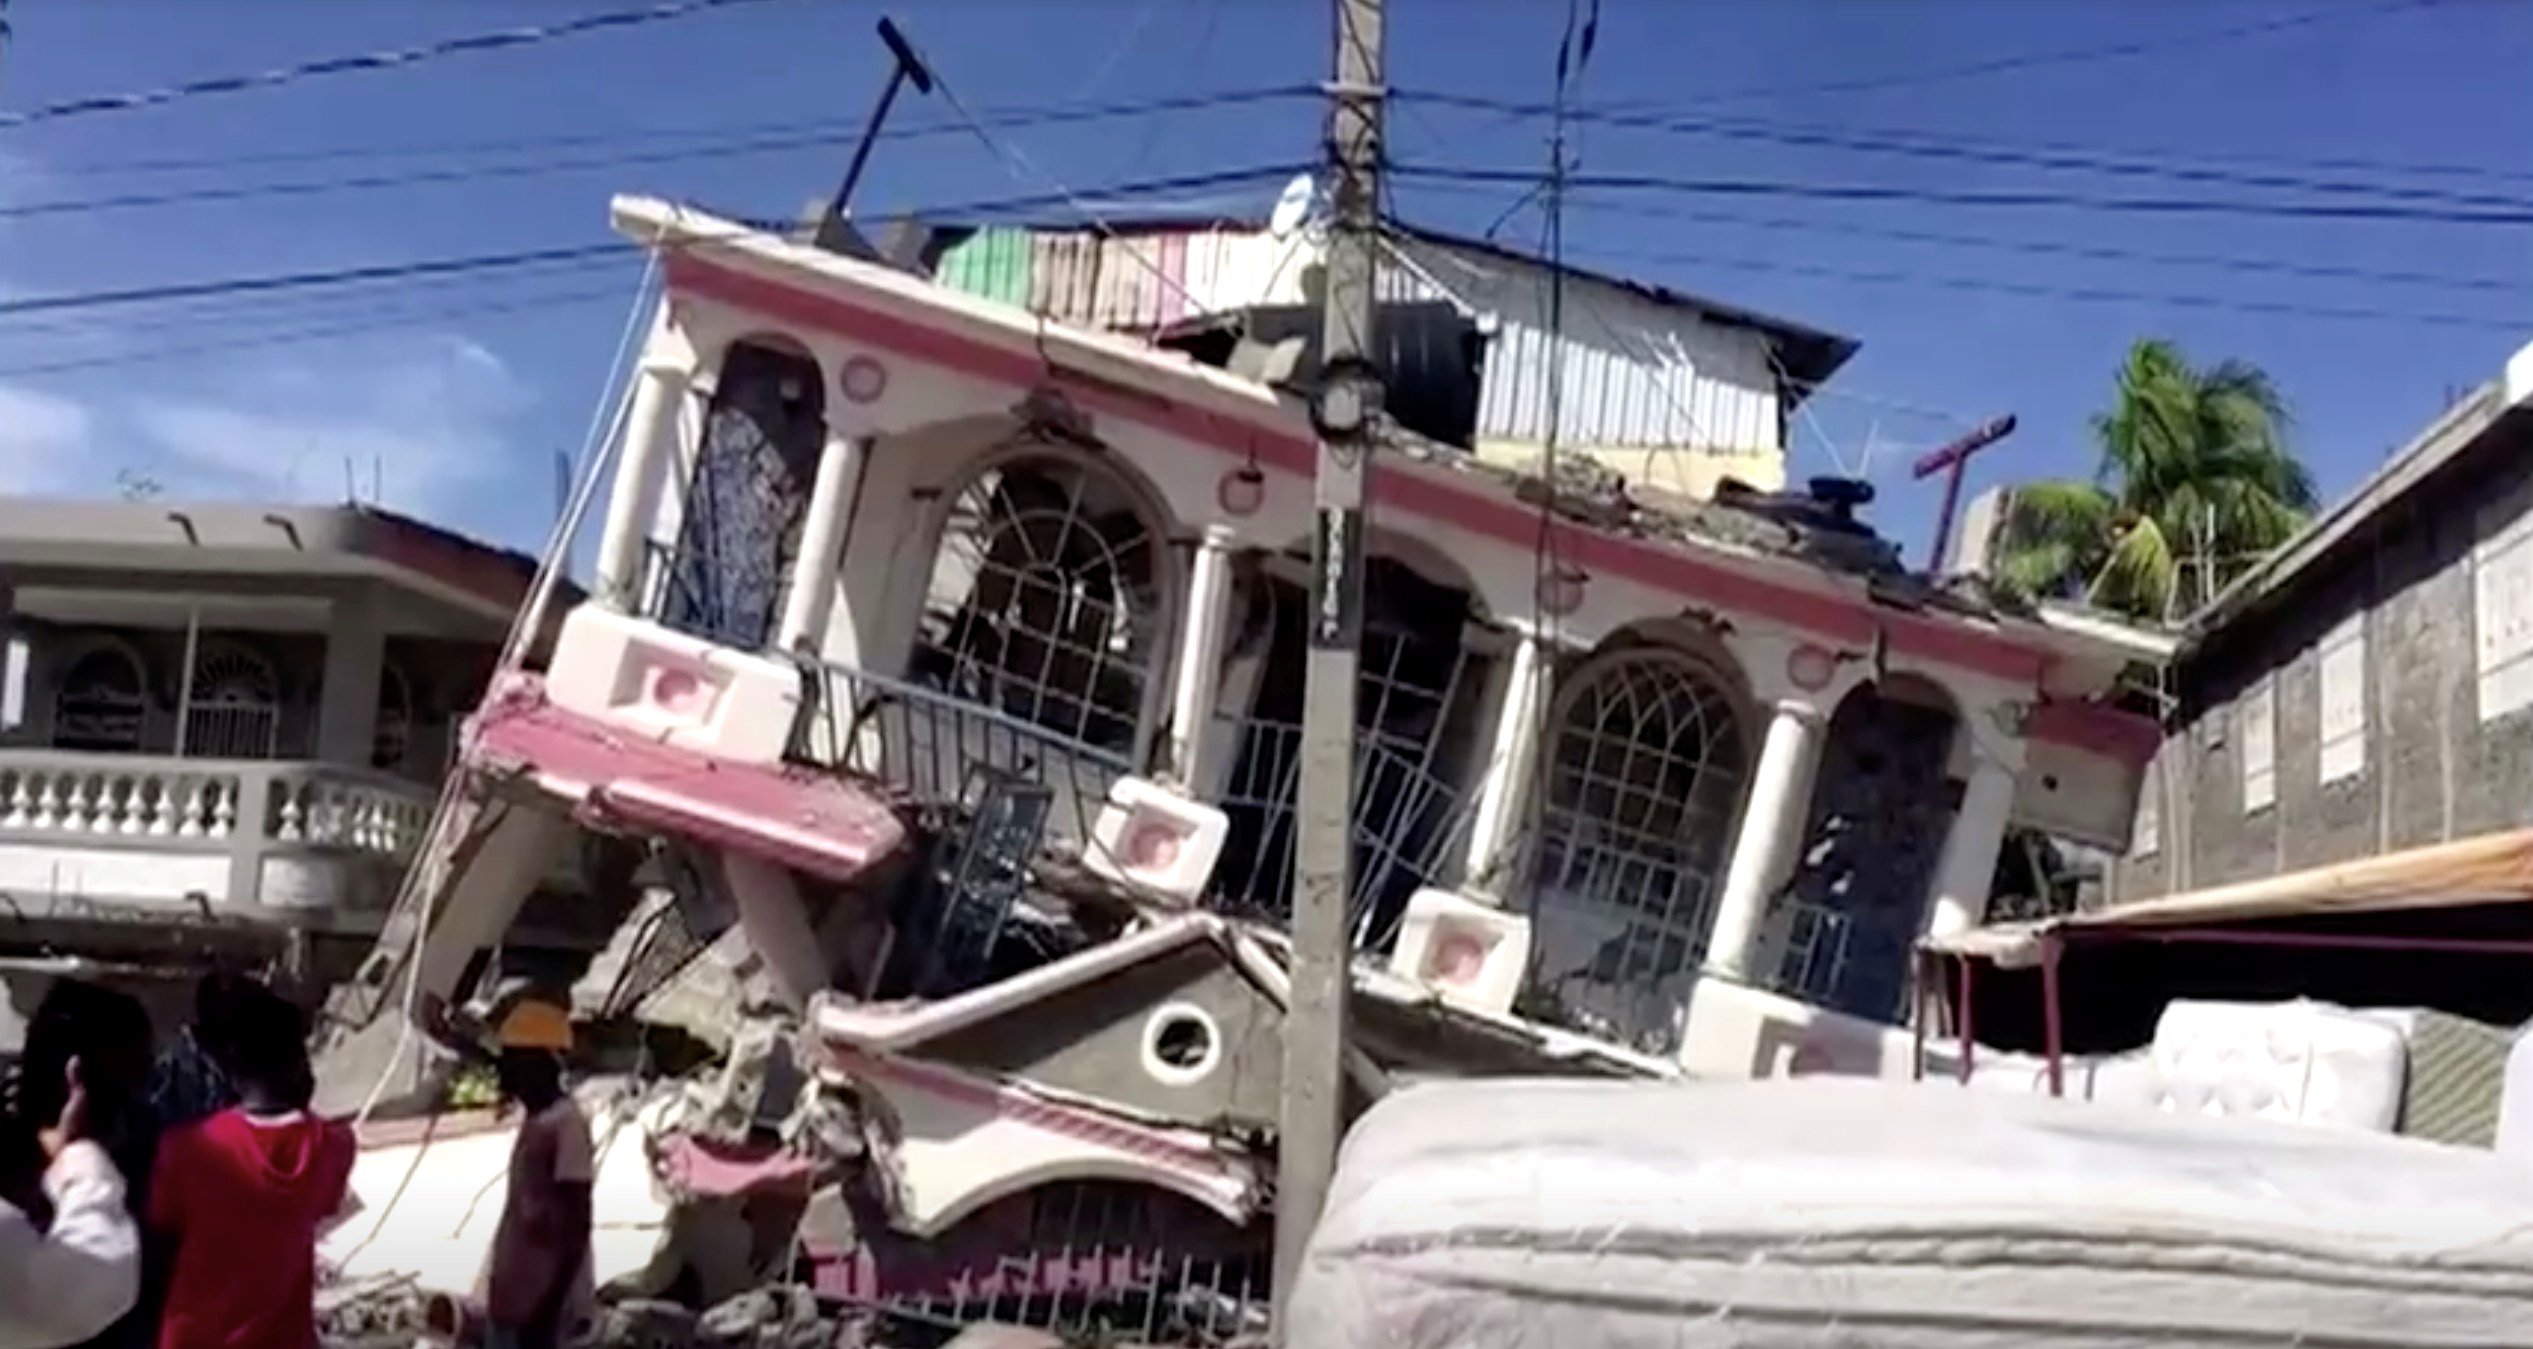 A collapsed building is pictured following a magnitude 7.2 earthquake in Les Cayes, Haiti, in this still image taken from a video Aug. 14, 2021. (CNS photo/Reuters TV)